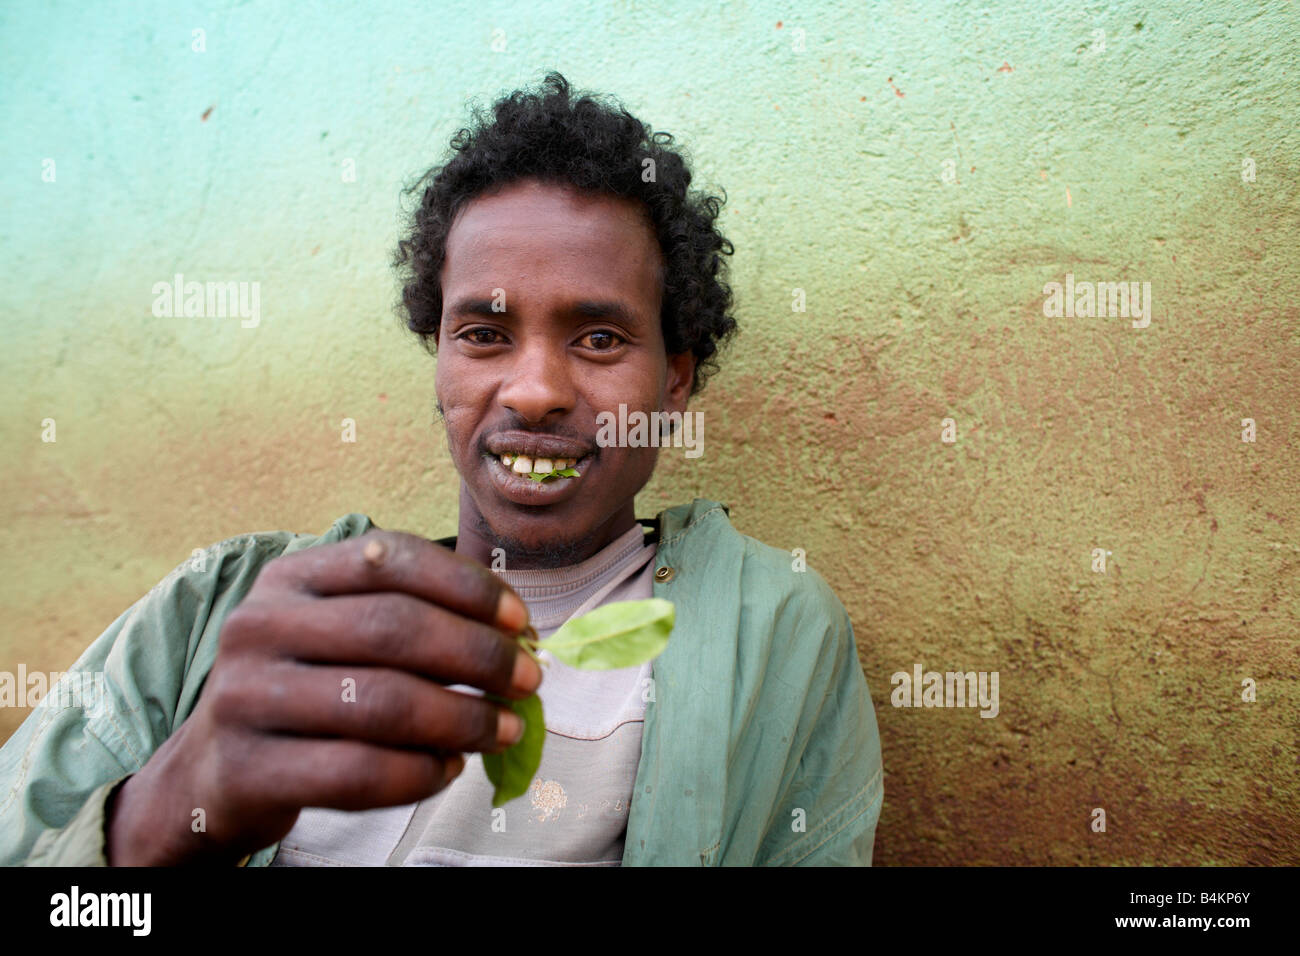 Man chewing Chat, Harar, Ethiopia Stock Photo